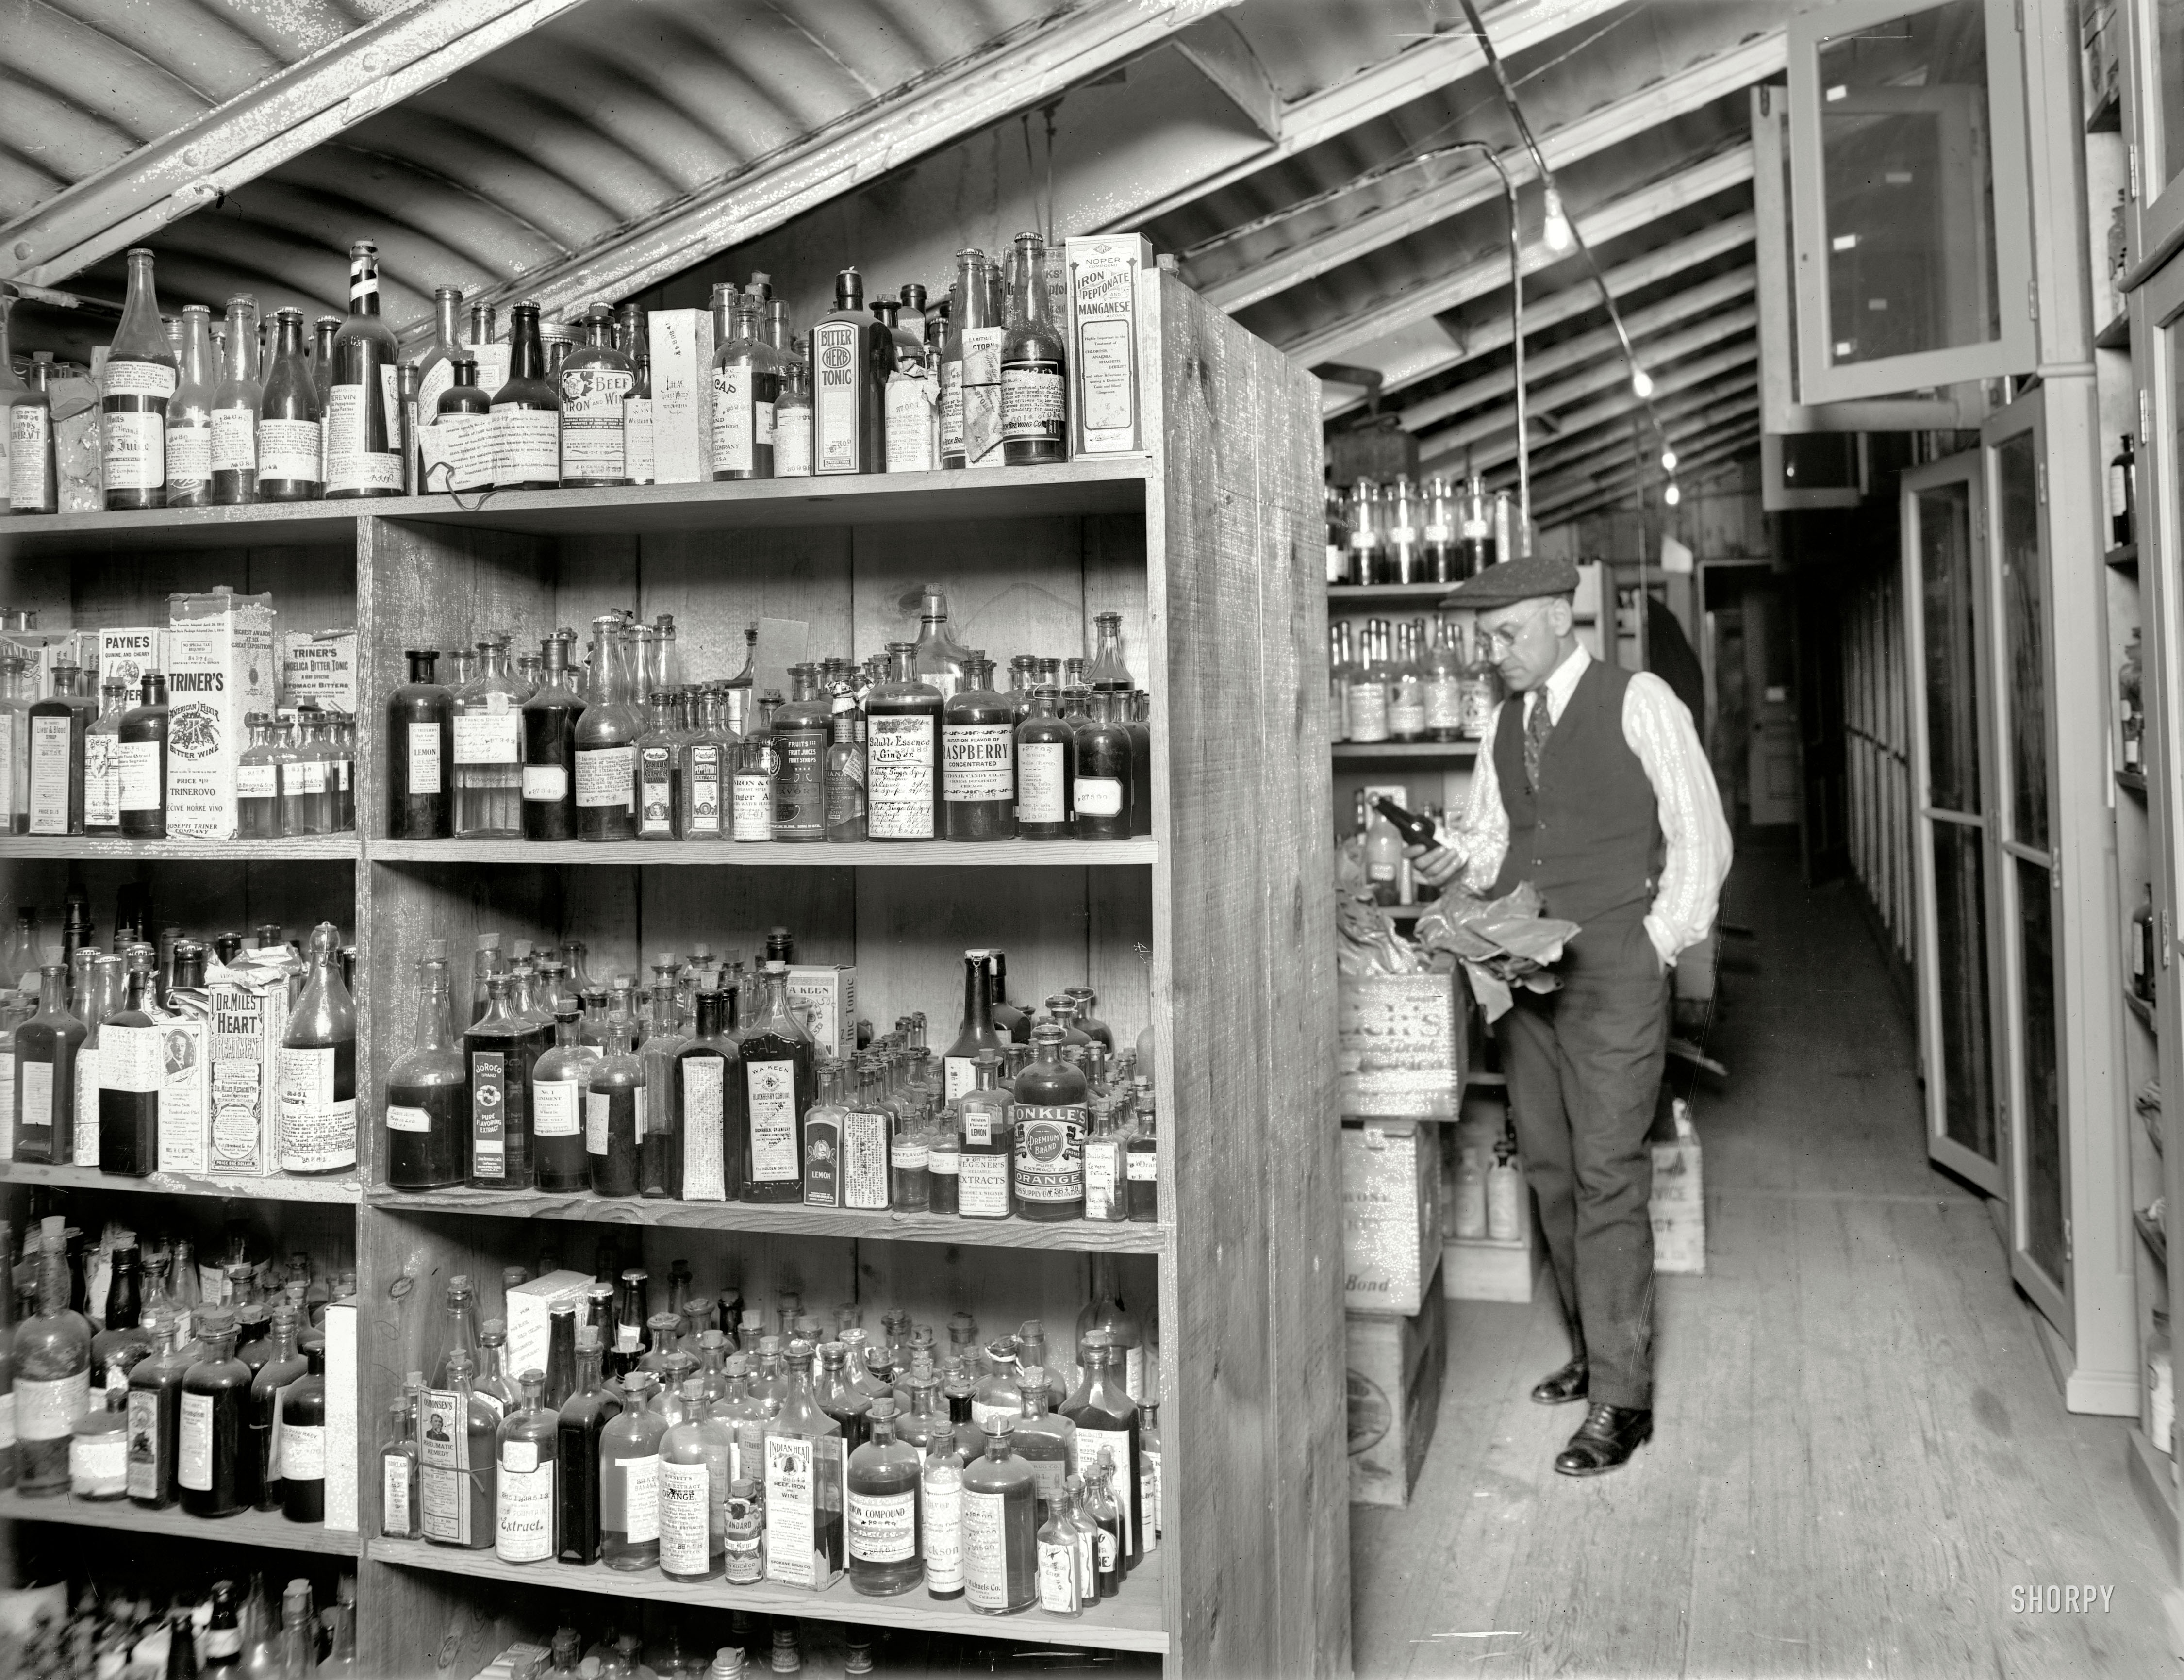 Washington, D.C., 1920. "Treasury Internal Revenue department." An array of essences, extracts and elixirs being tested for alcohol content at the start of Prohibition. National Photo Company Collection glass negative. View full size.